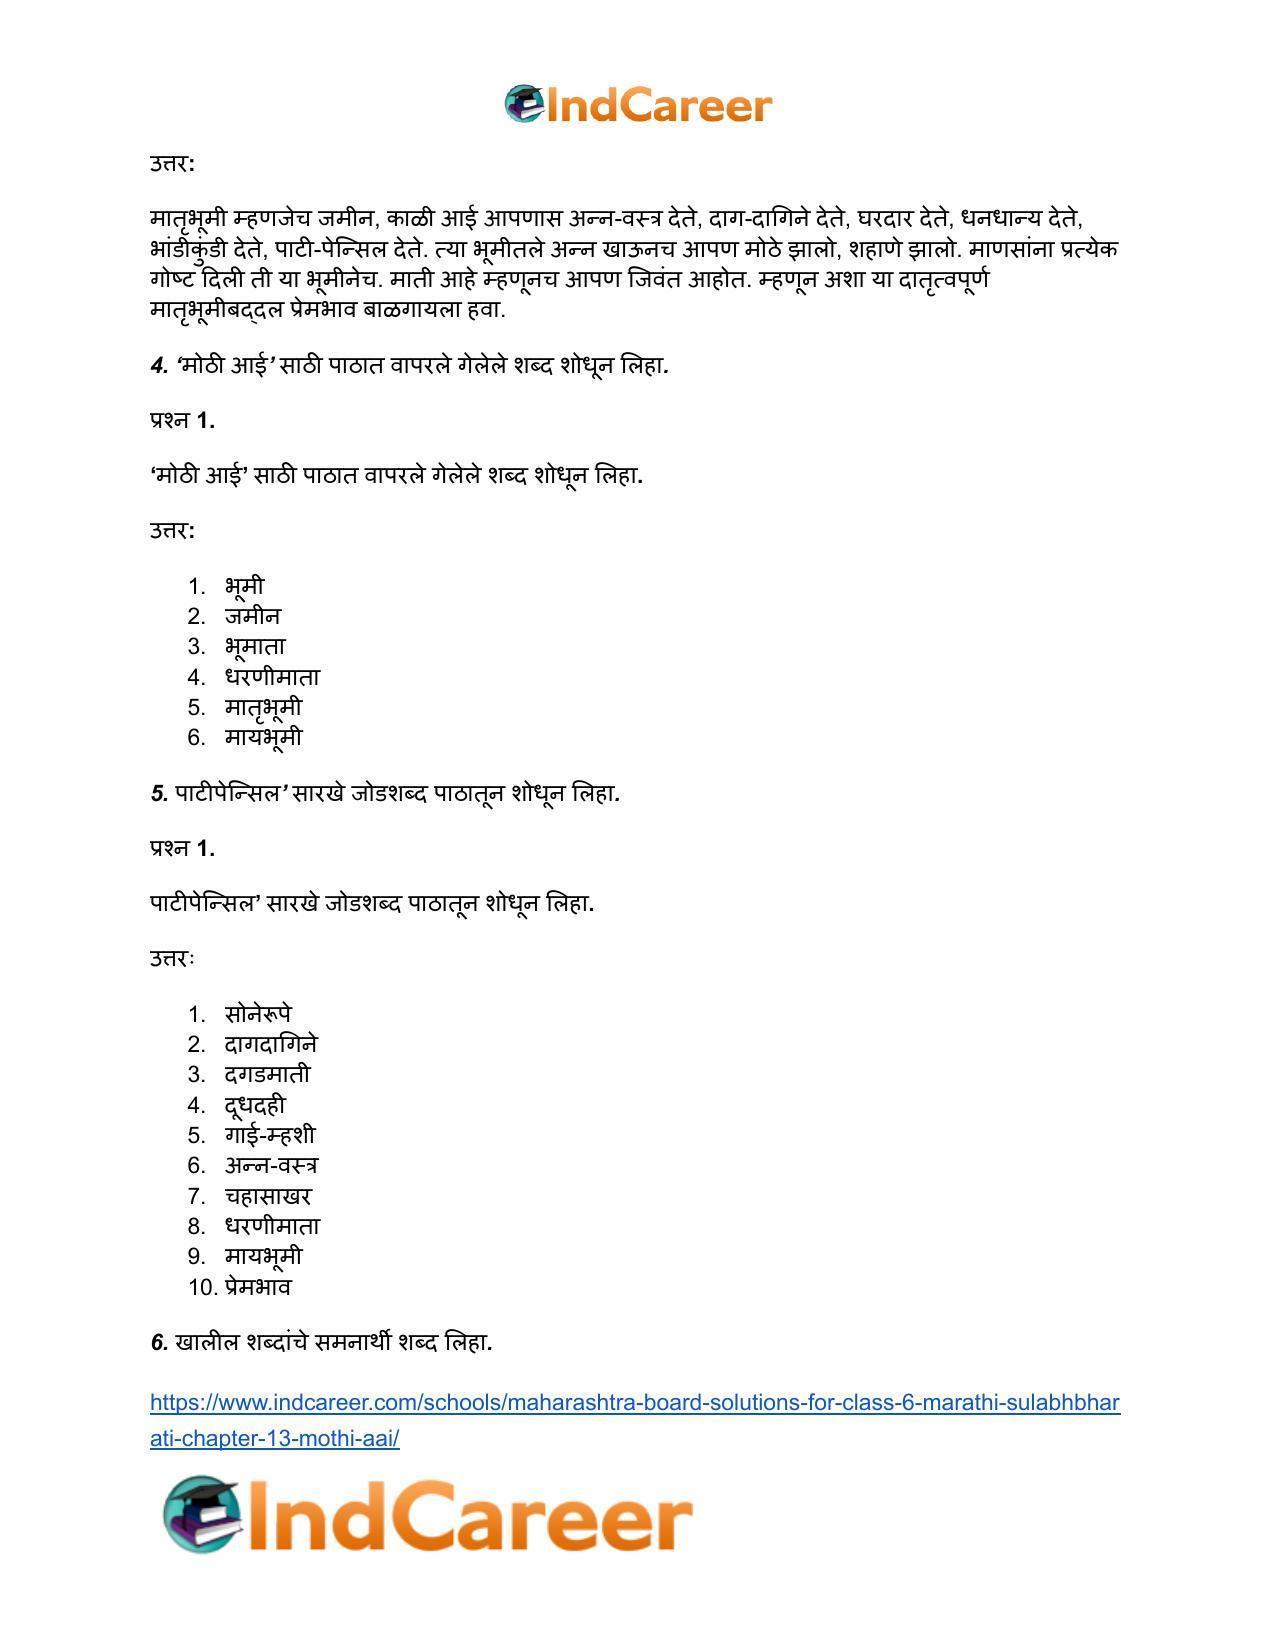 Maharashtra Board Solutions for Class 6- Marathi Sulabhbharati: Chapter 13- मोठी आई - Page 4